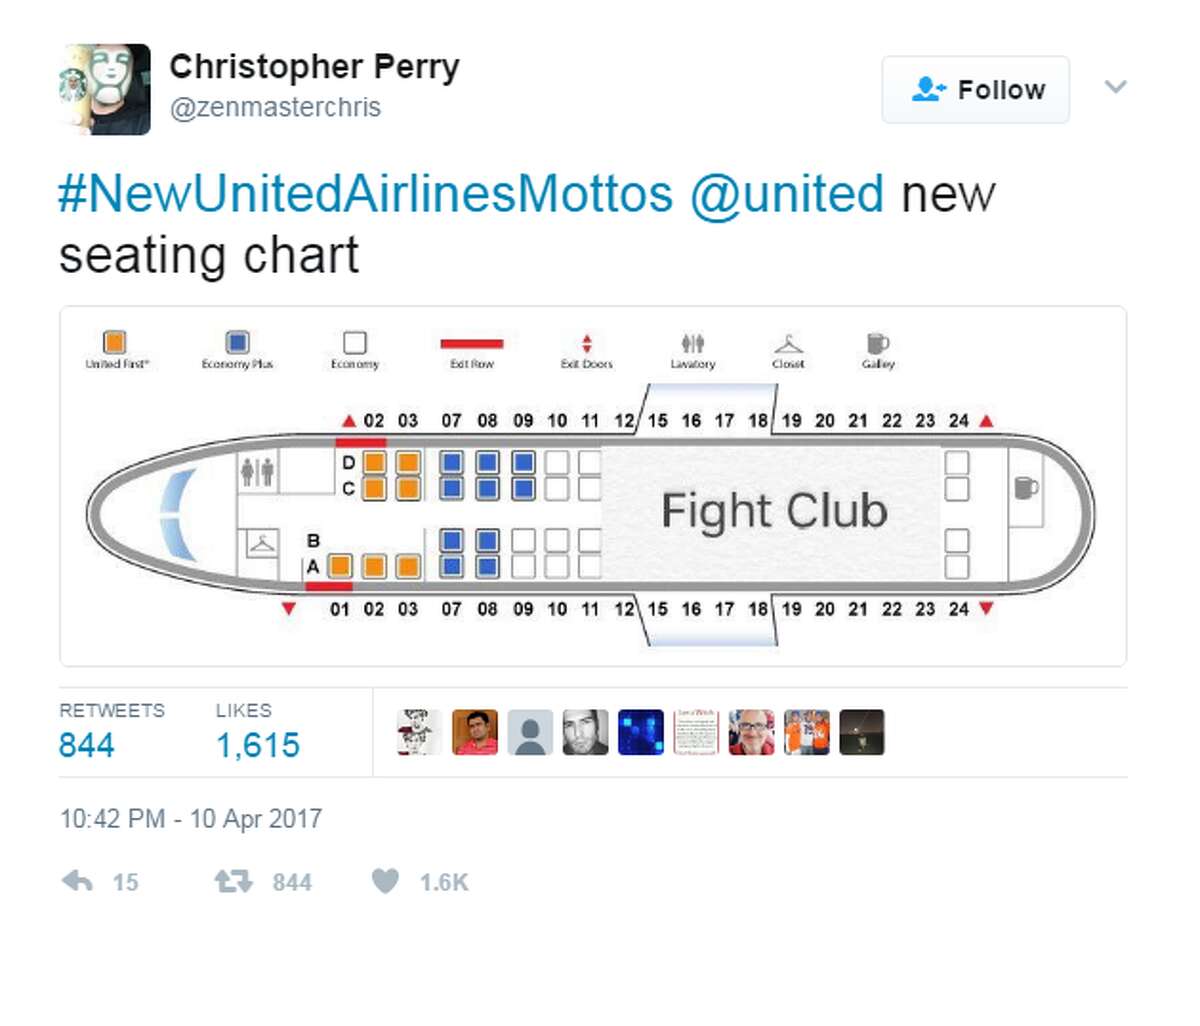 #NewUnitedAirlinesMottos Twitter users have come up with a new hashtag to describe United Airlines' pubic relations disaster.  Click through to see how Twitter has roasted United Airlines. @zenmasterchris